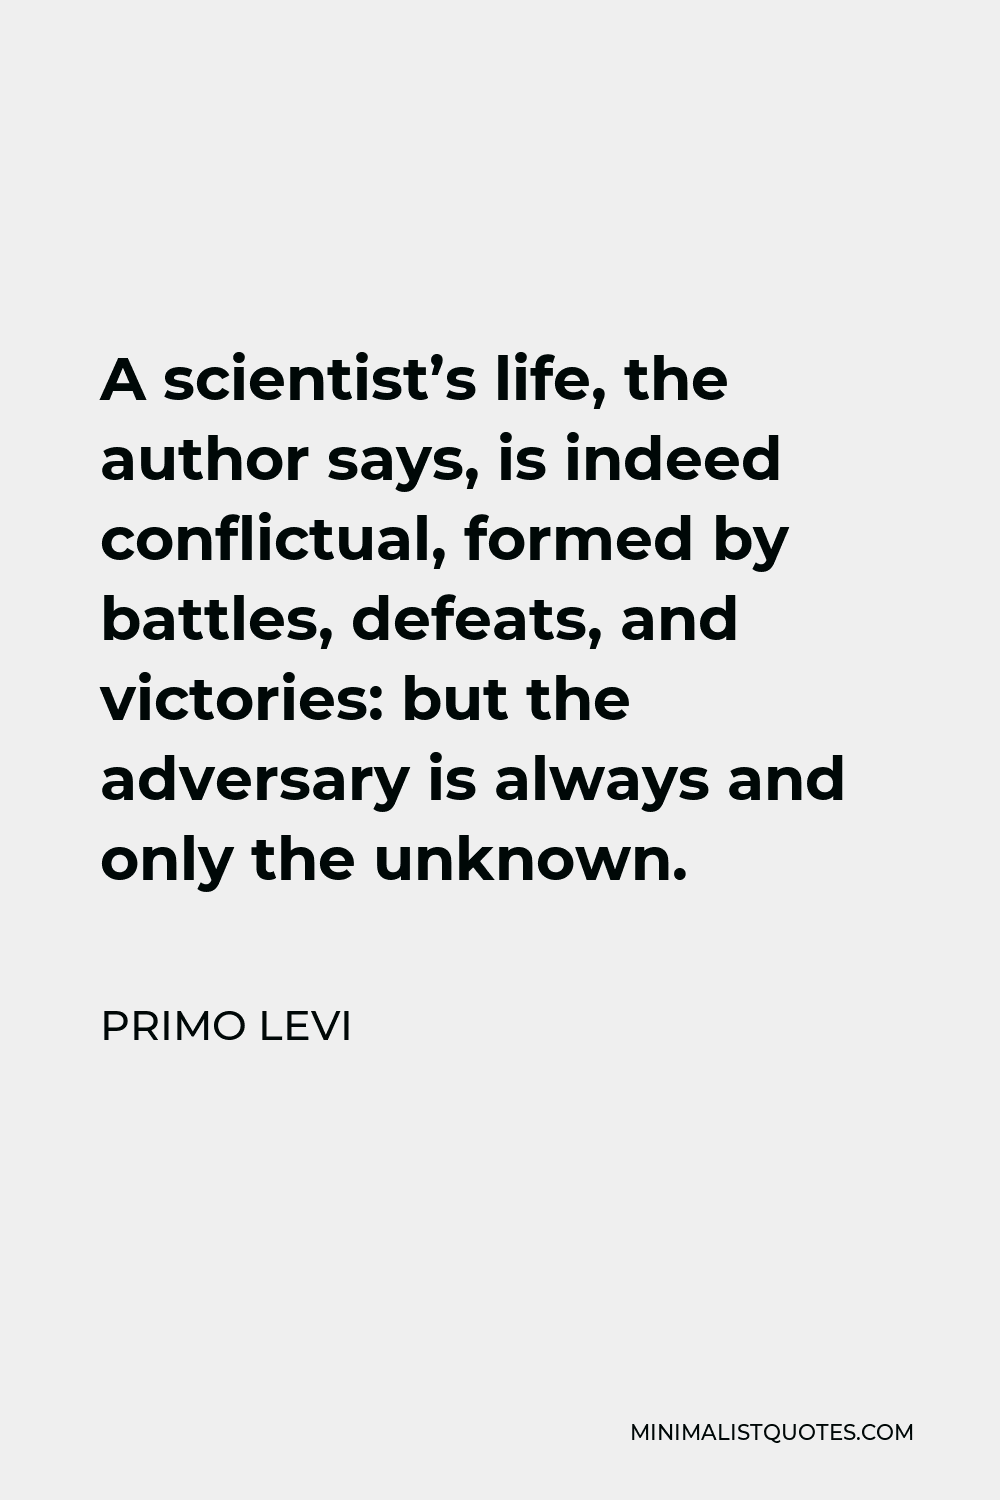 Primo Levi Quote - A scientist’s life, the author says, is indeed conflictual, formed by battles, defeats, and victories: but the adversary is always and only the unknown.